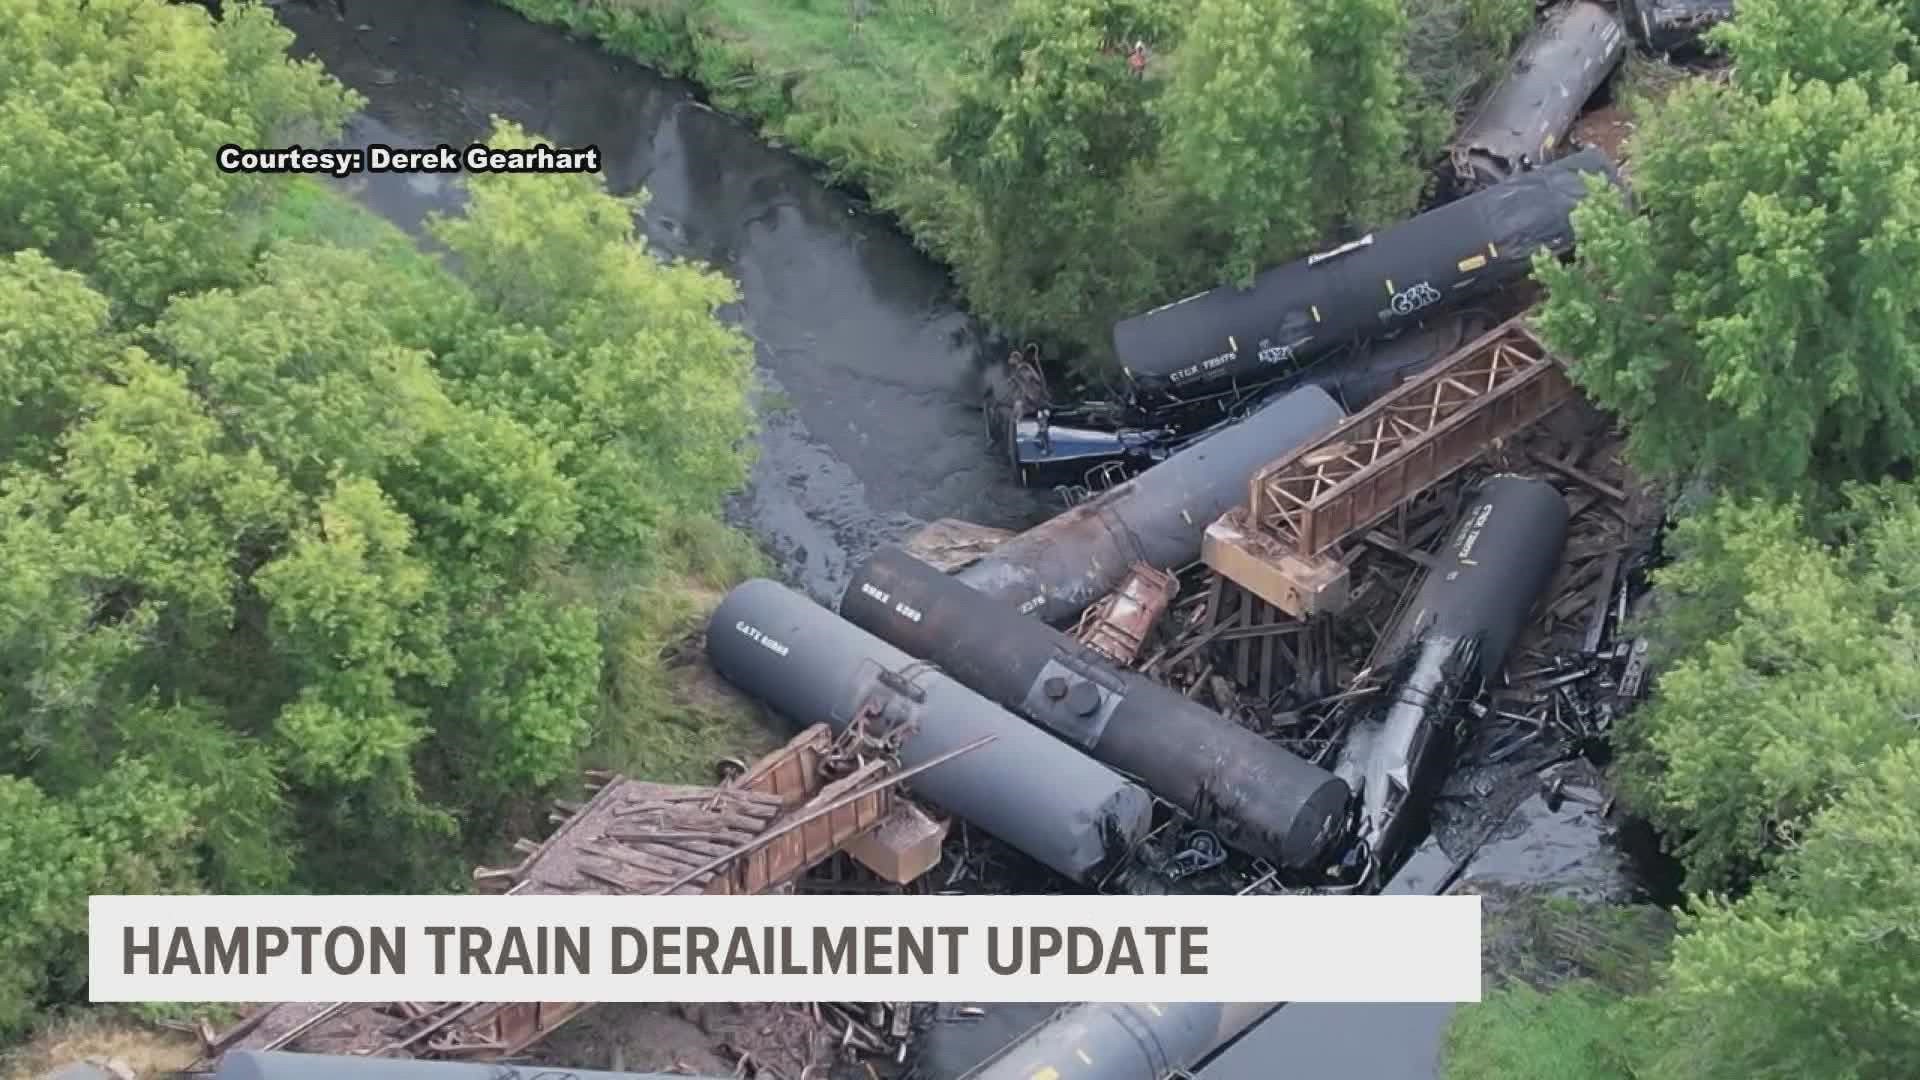 The asphalt should be removed from Otter Creek by the end of the week, but rail cars will take weeks to remove, according to Iowa DNR.